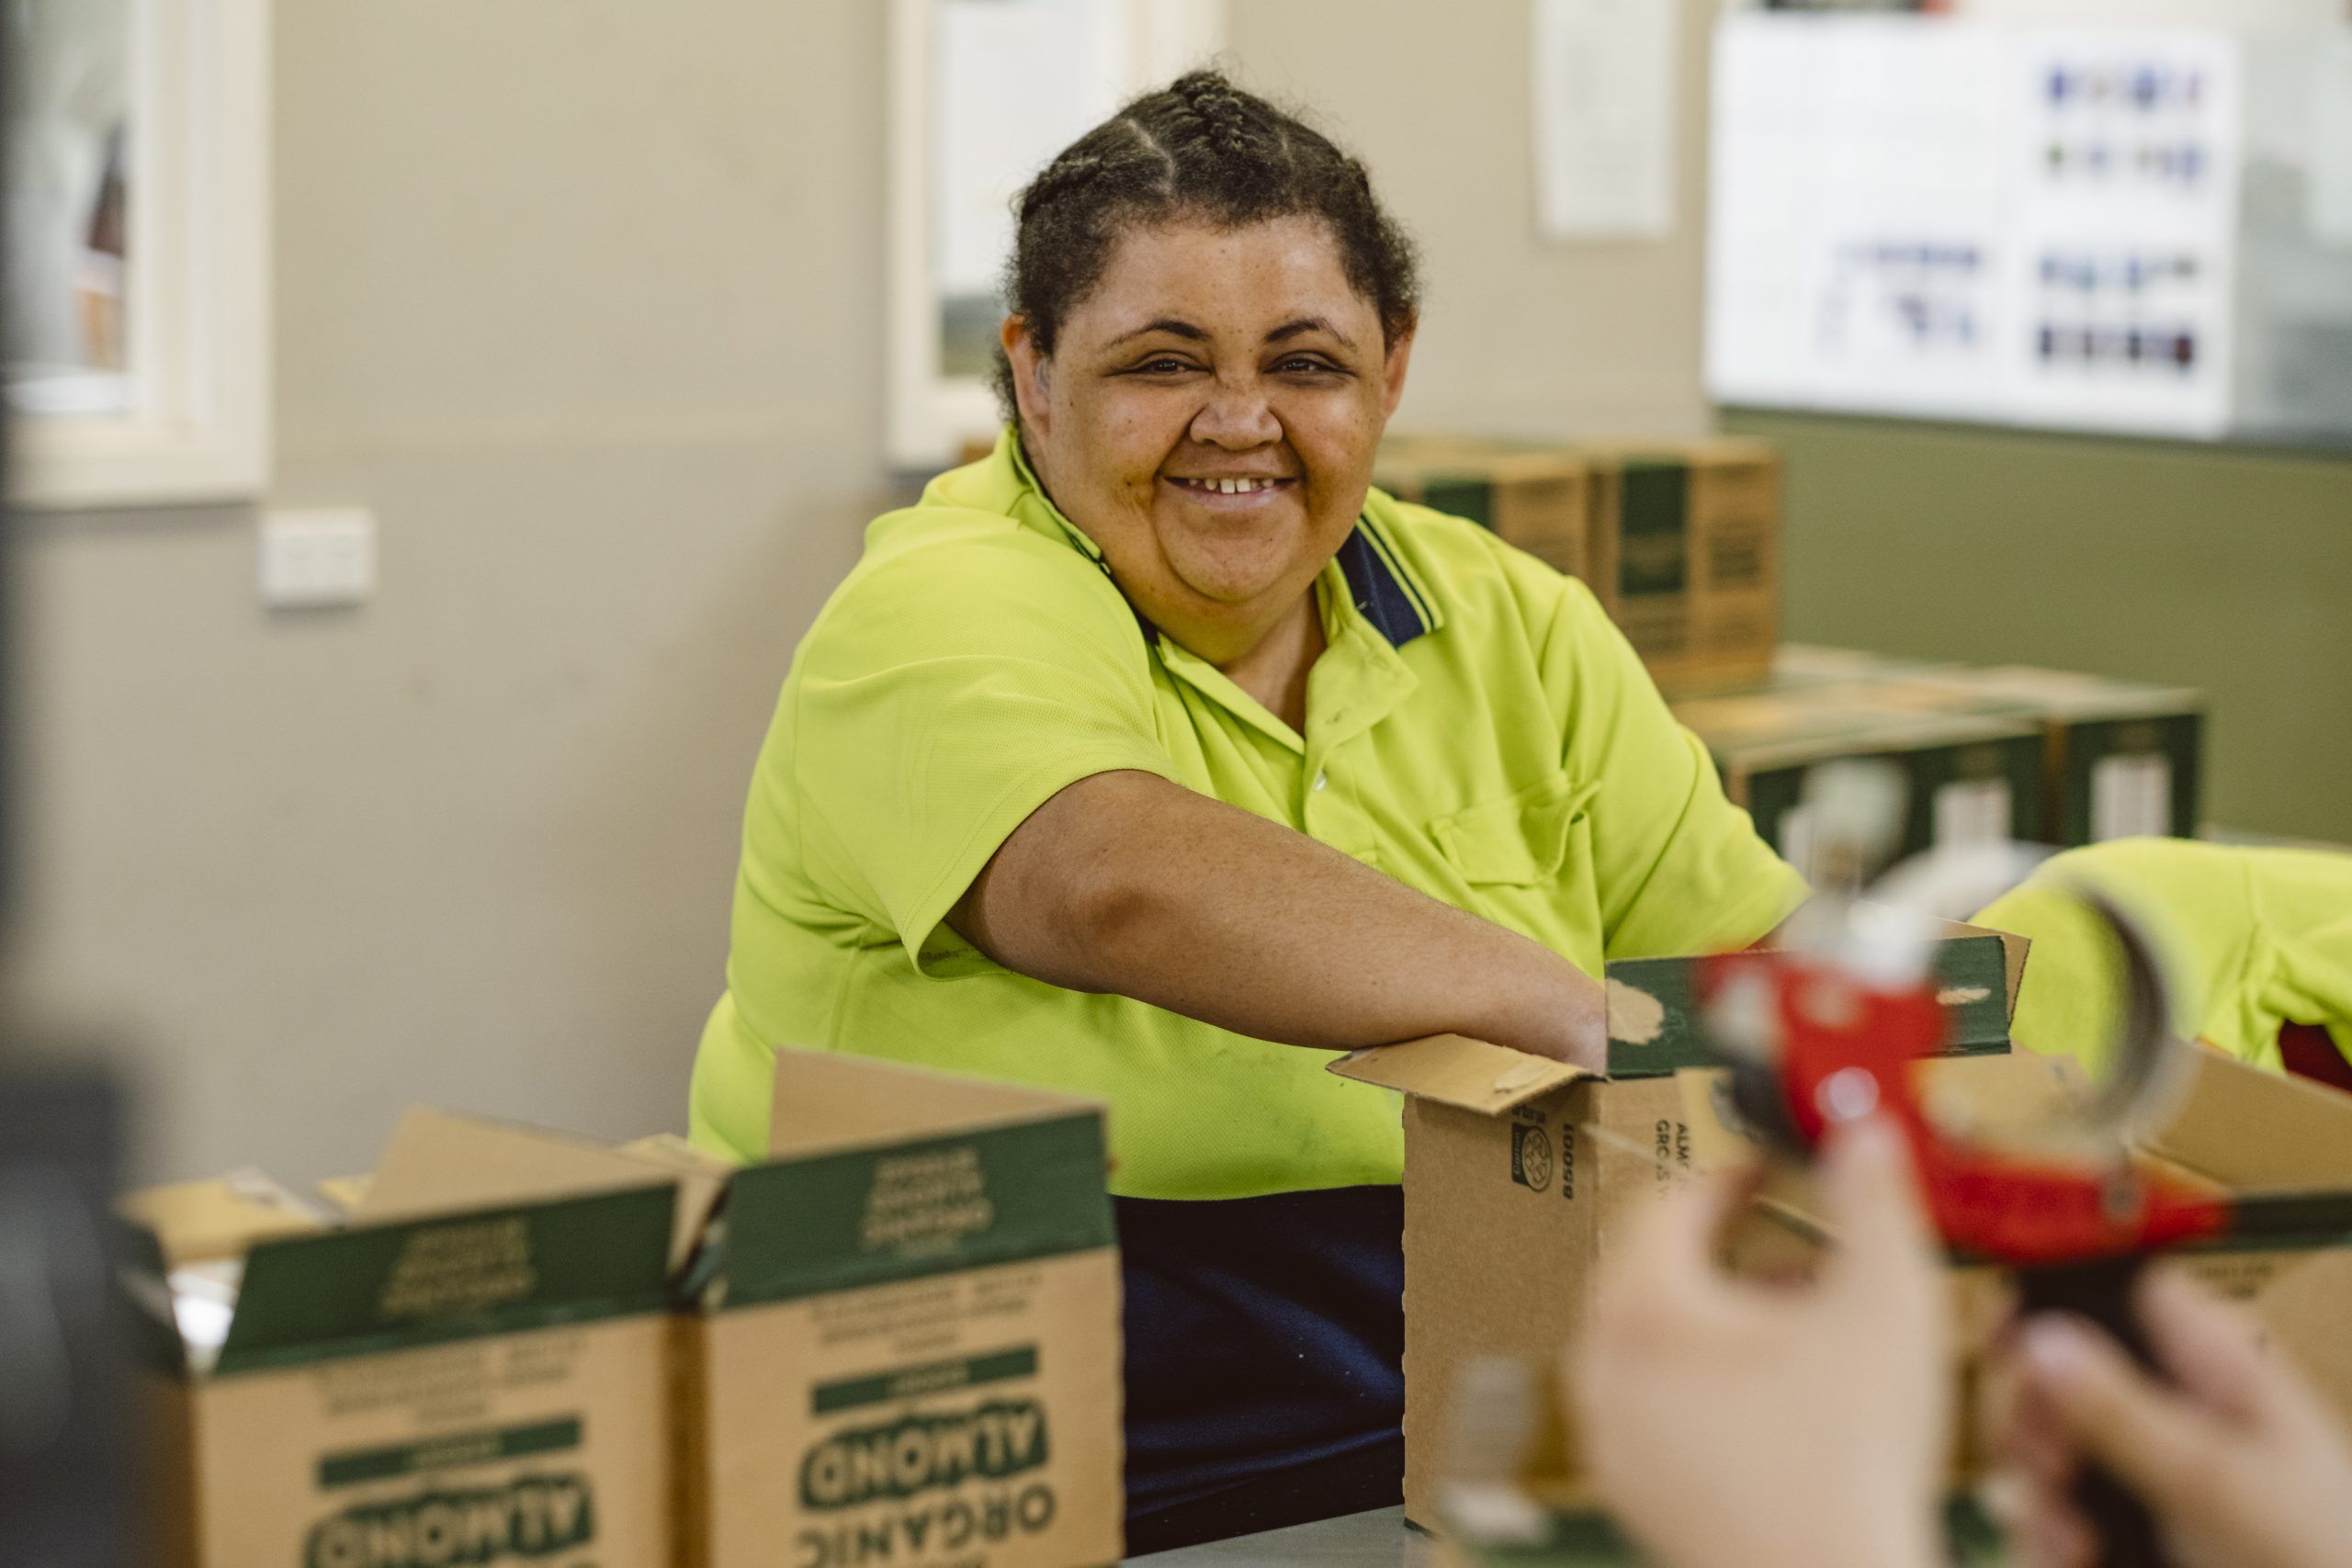 employee in high vis packing product into box while smiling